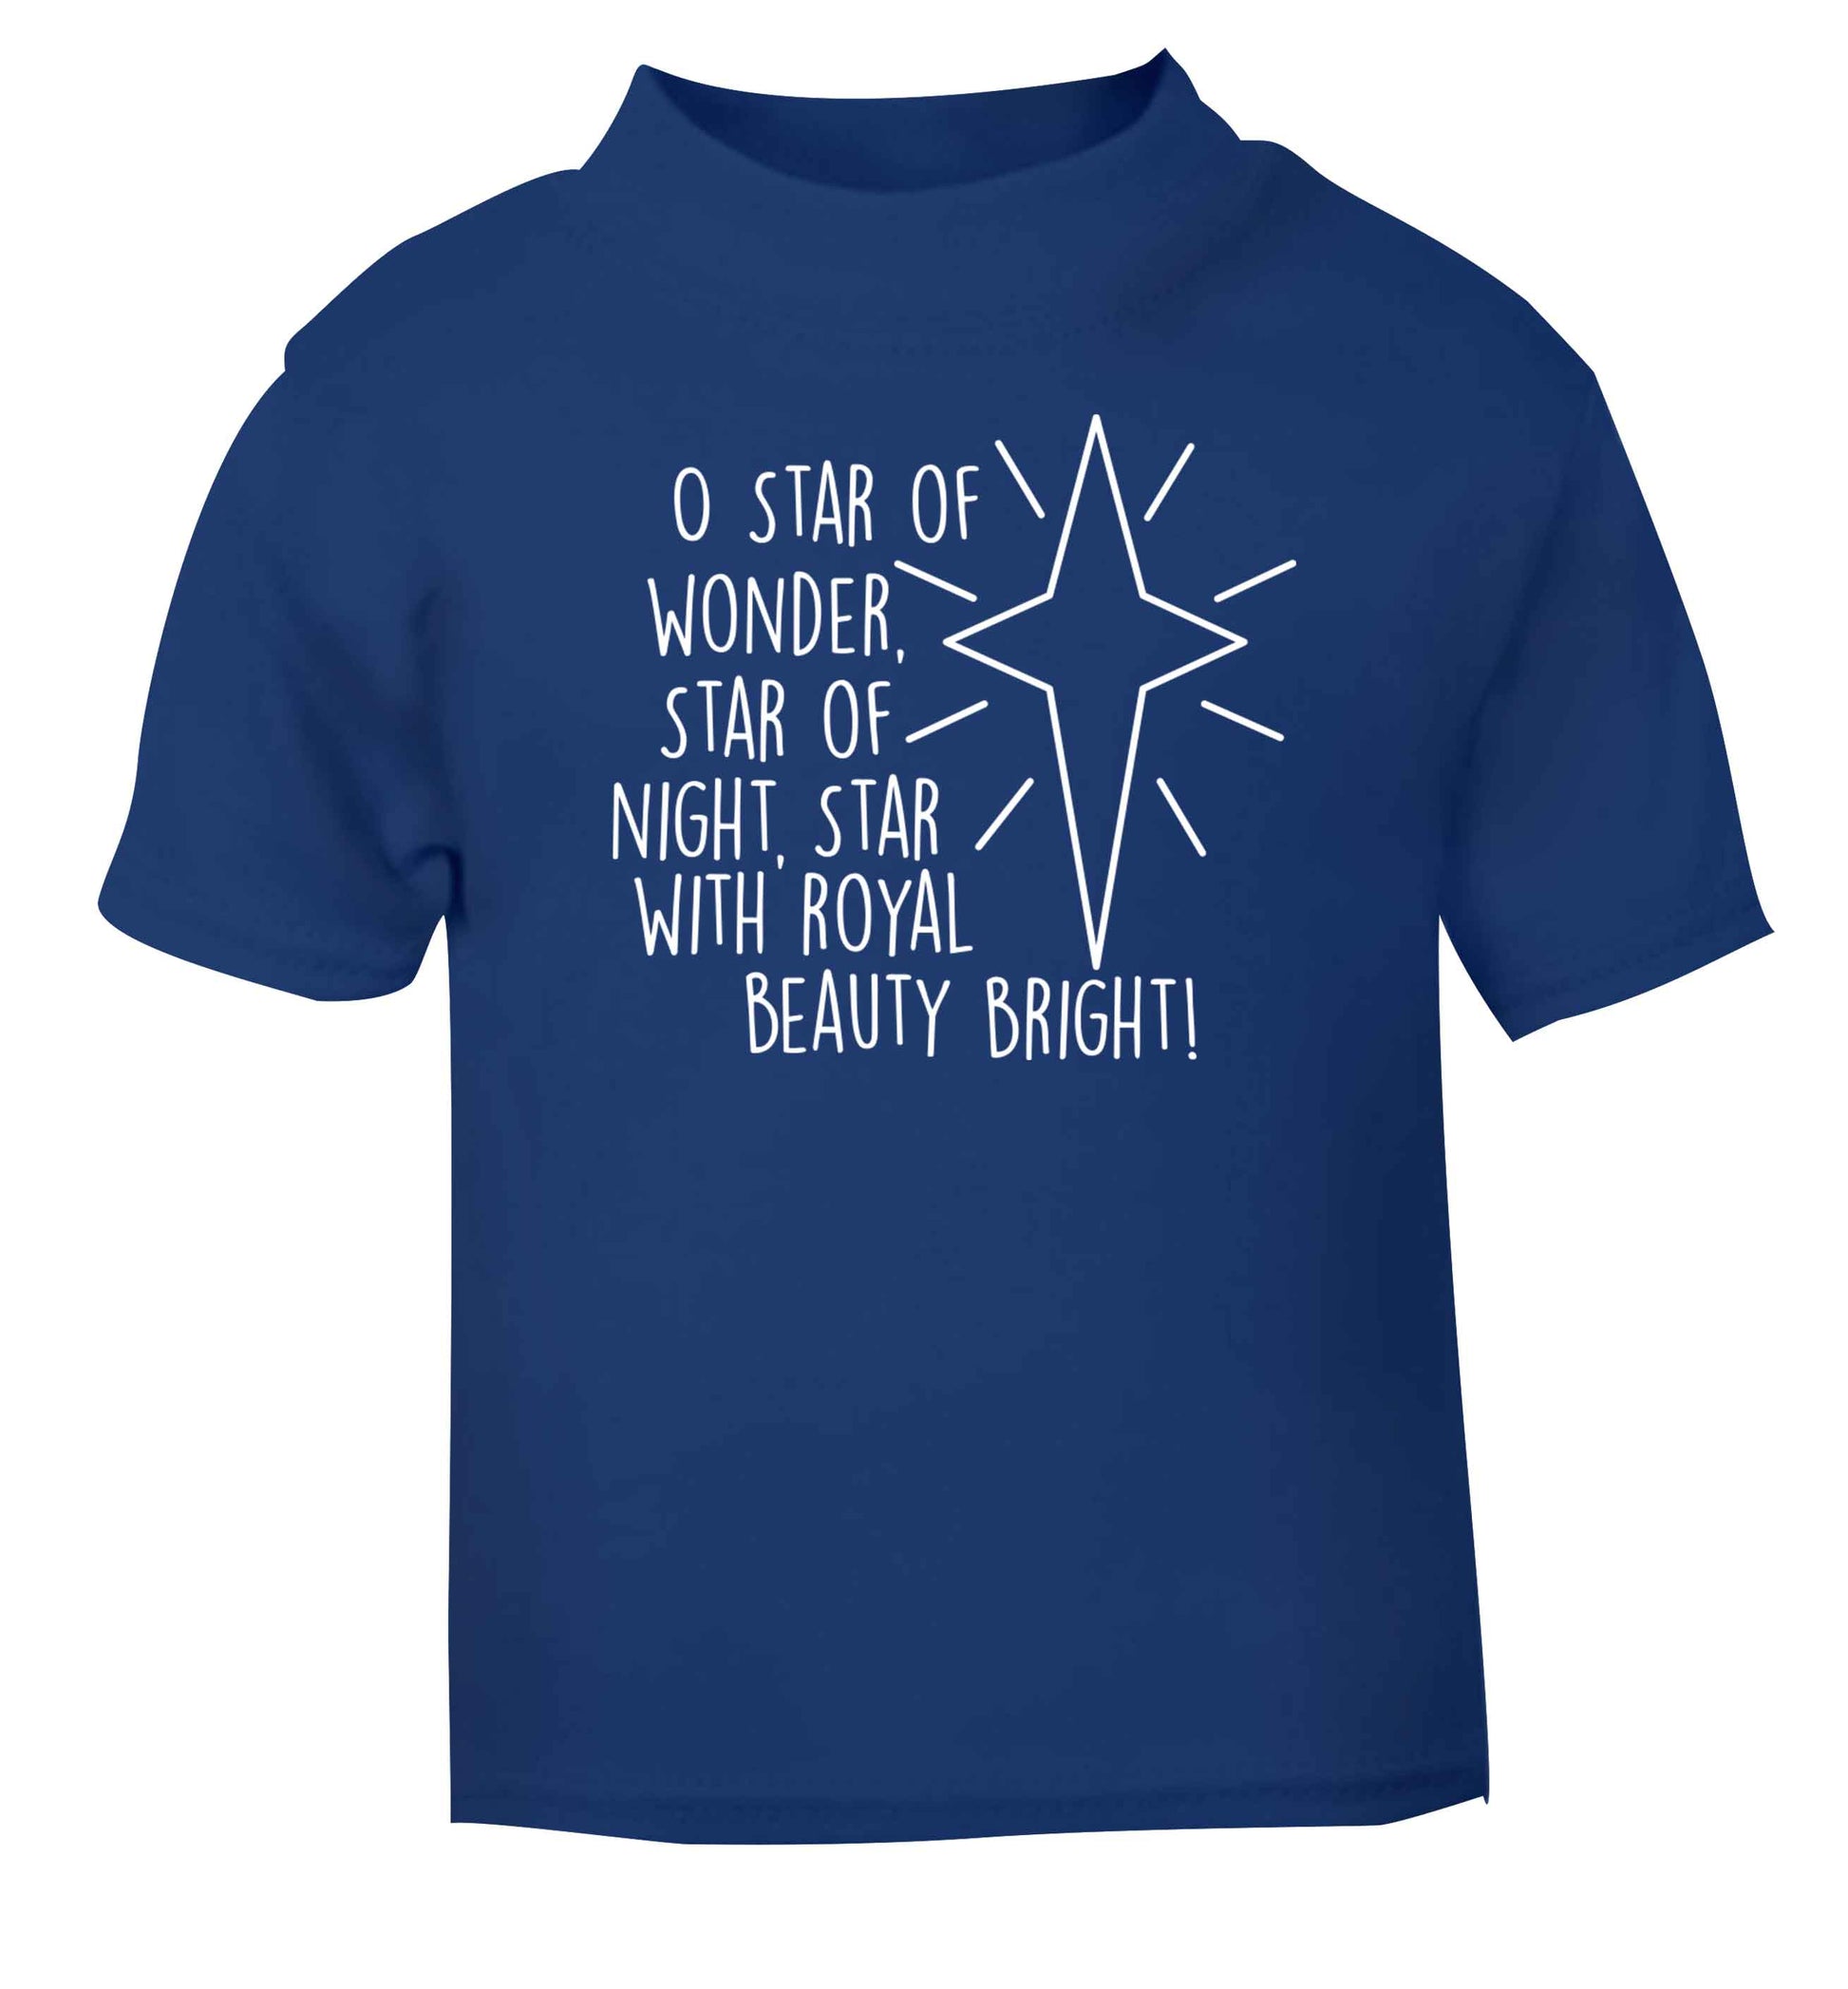 Oh star of wonder star of night, star with royal beauty bright blue baby toddler Tshirt 2 Years